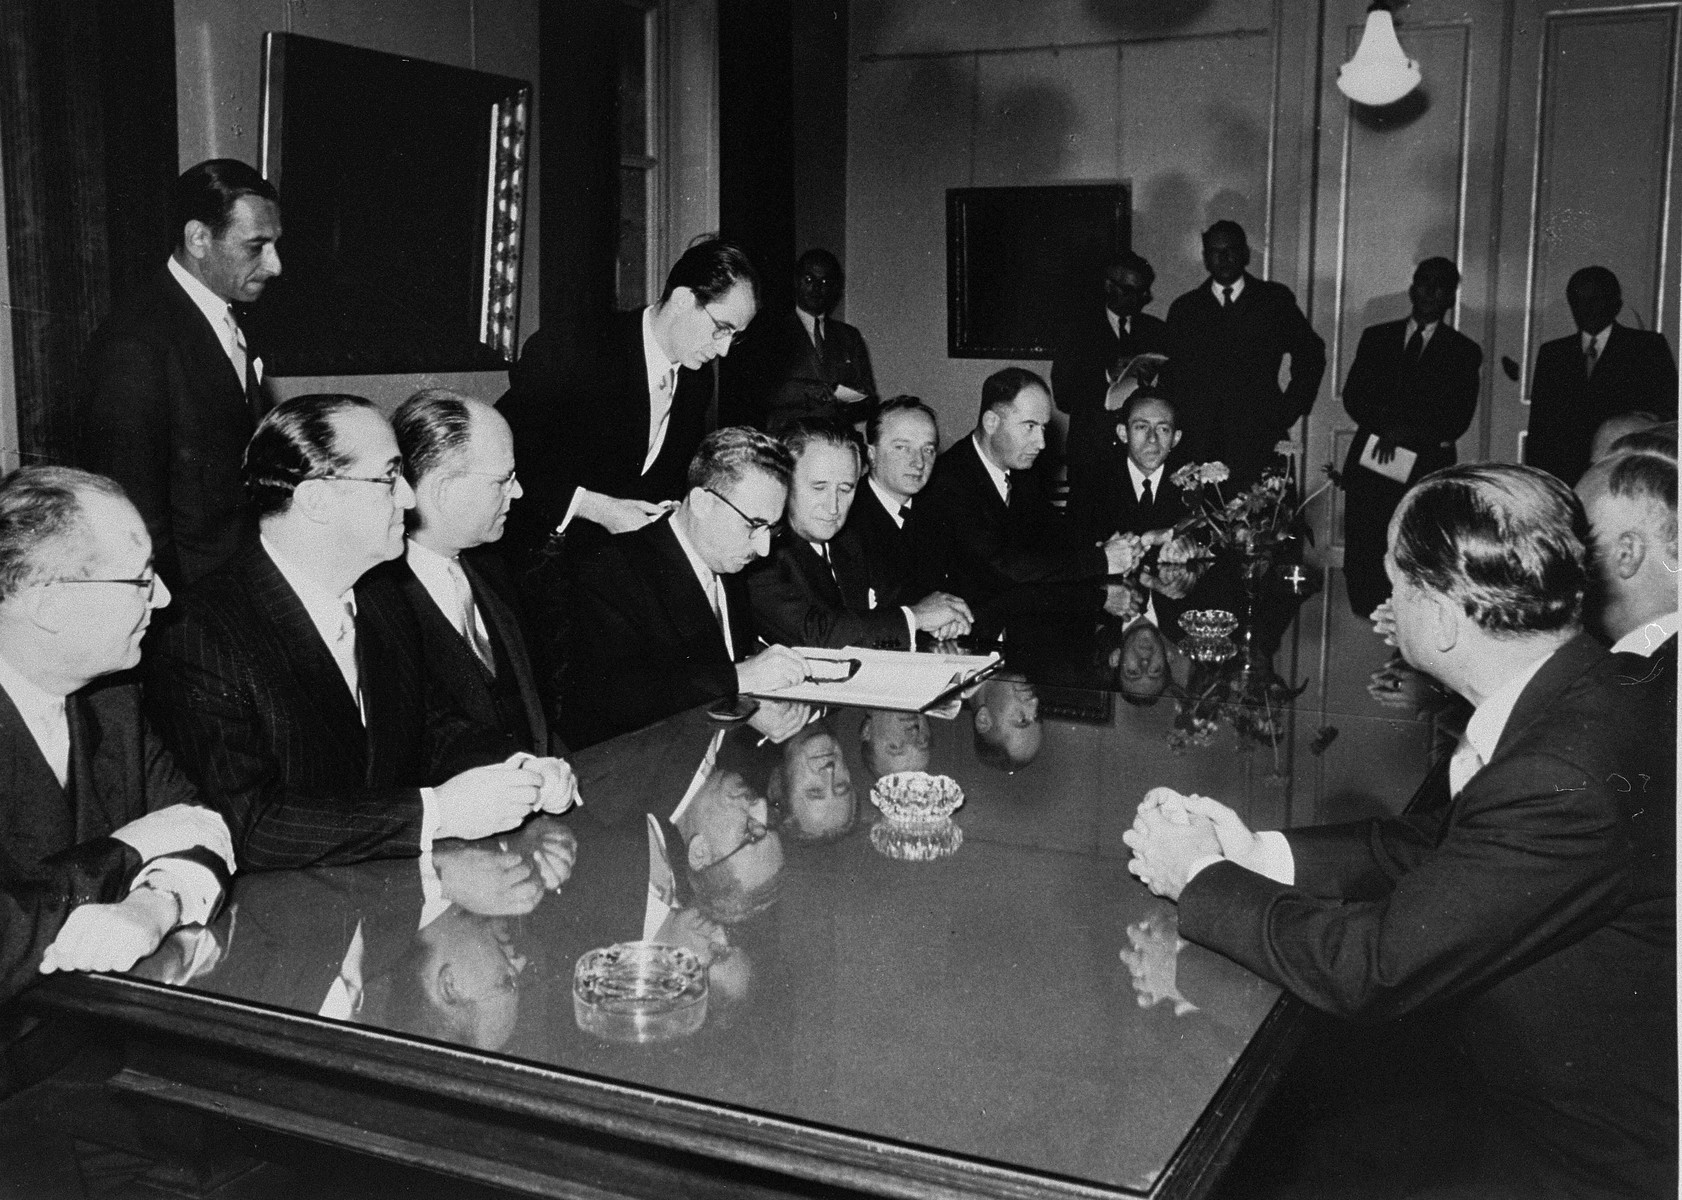 The signing of the Reparations Agreement between the German Federal Republic, the State of Israel, and the Conference on Jewish Material Claims.  

Seated from left to right are: unknown, Felix Shinnar, Giora Josephthal, Moshe Sharett, Nahum Goldmann, and Benjamin Ferencz.